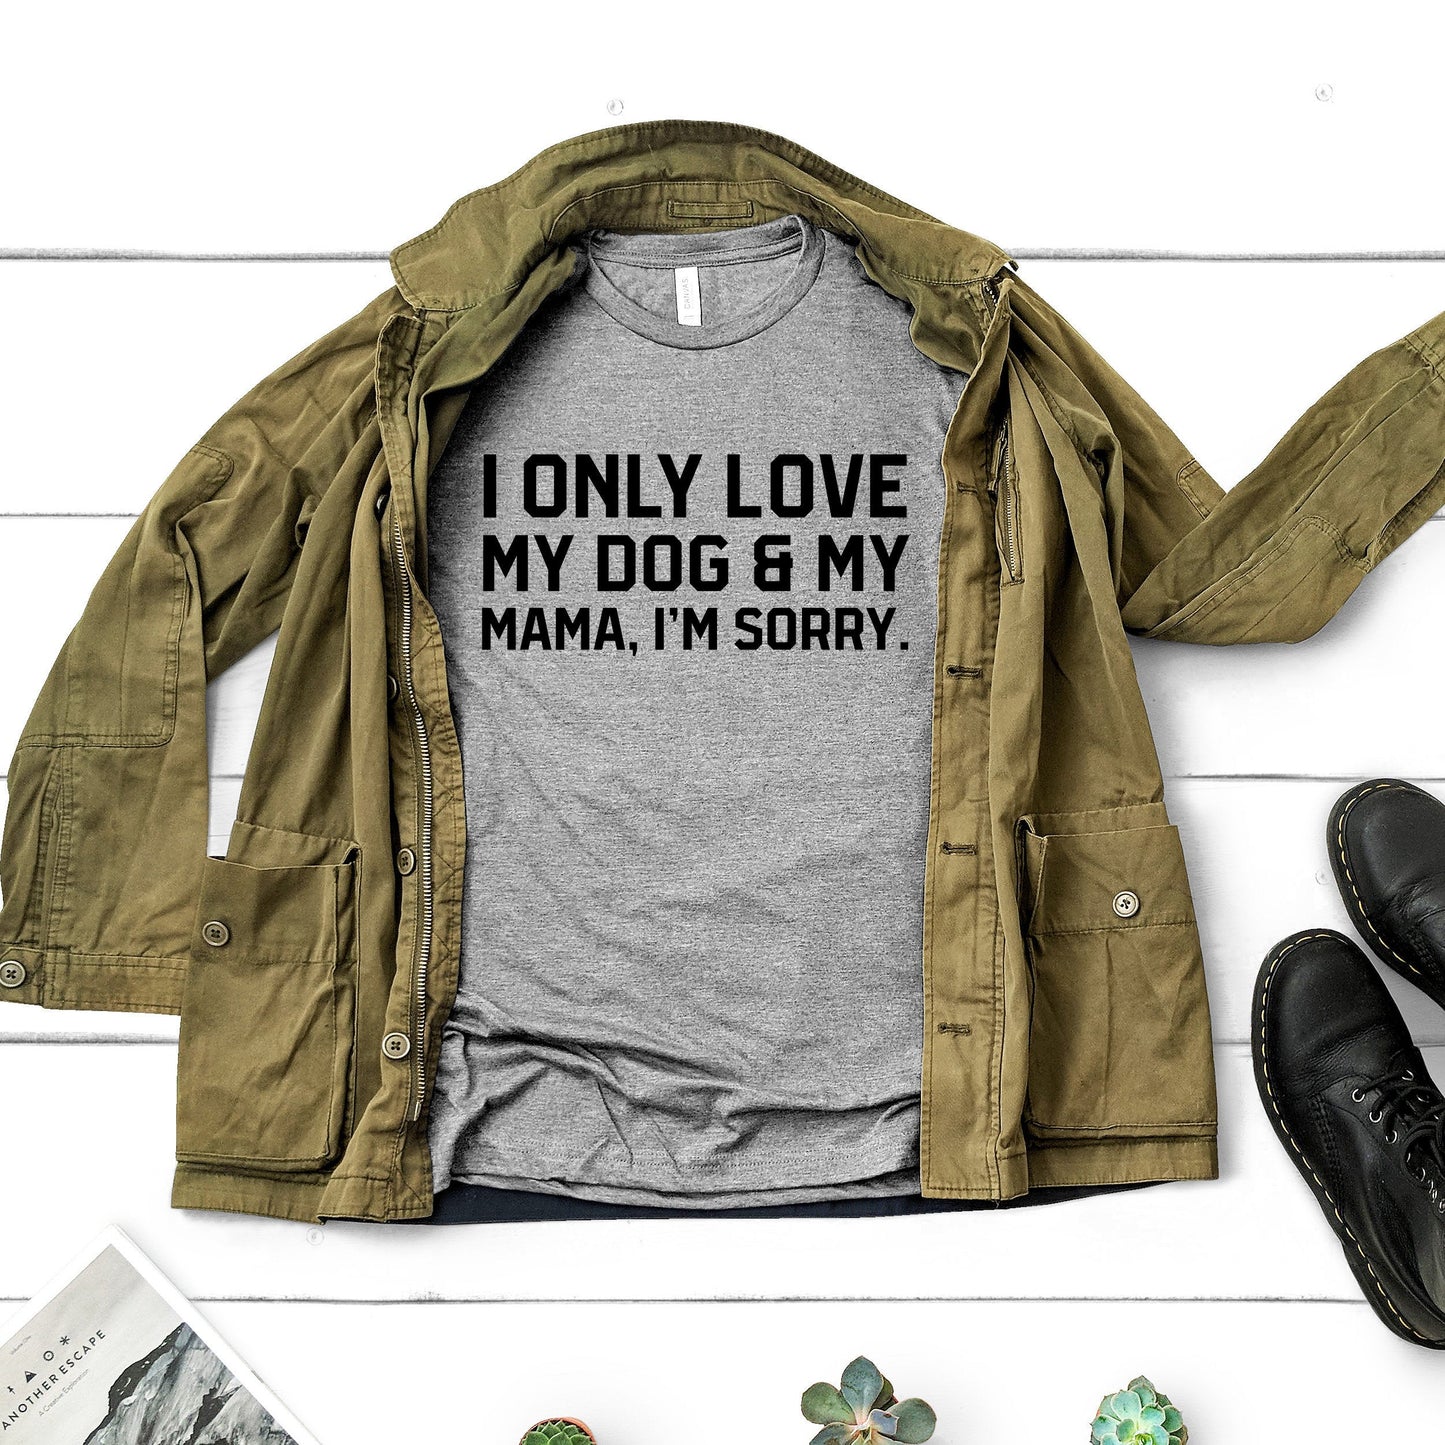 I Only Love My Dog & My Mama, I'm Sorry Shirt | Short Sleeved Shirt | Multiple Color Options | Made To Order